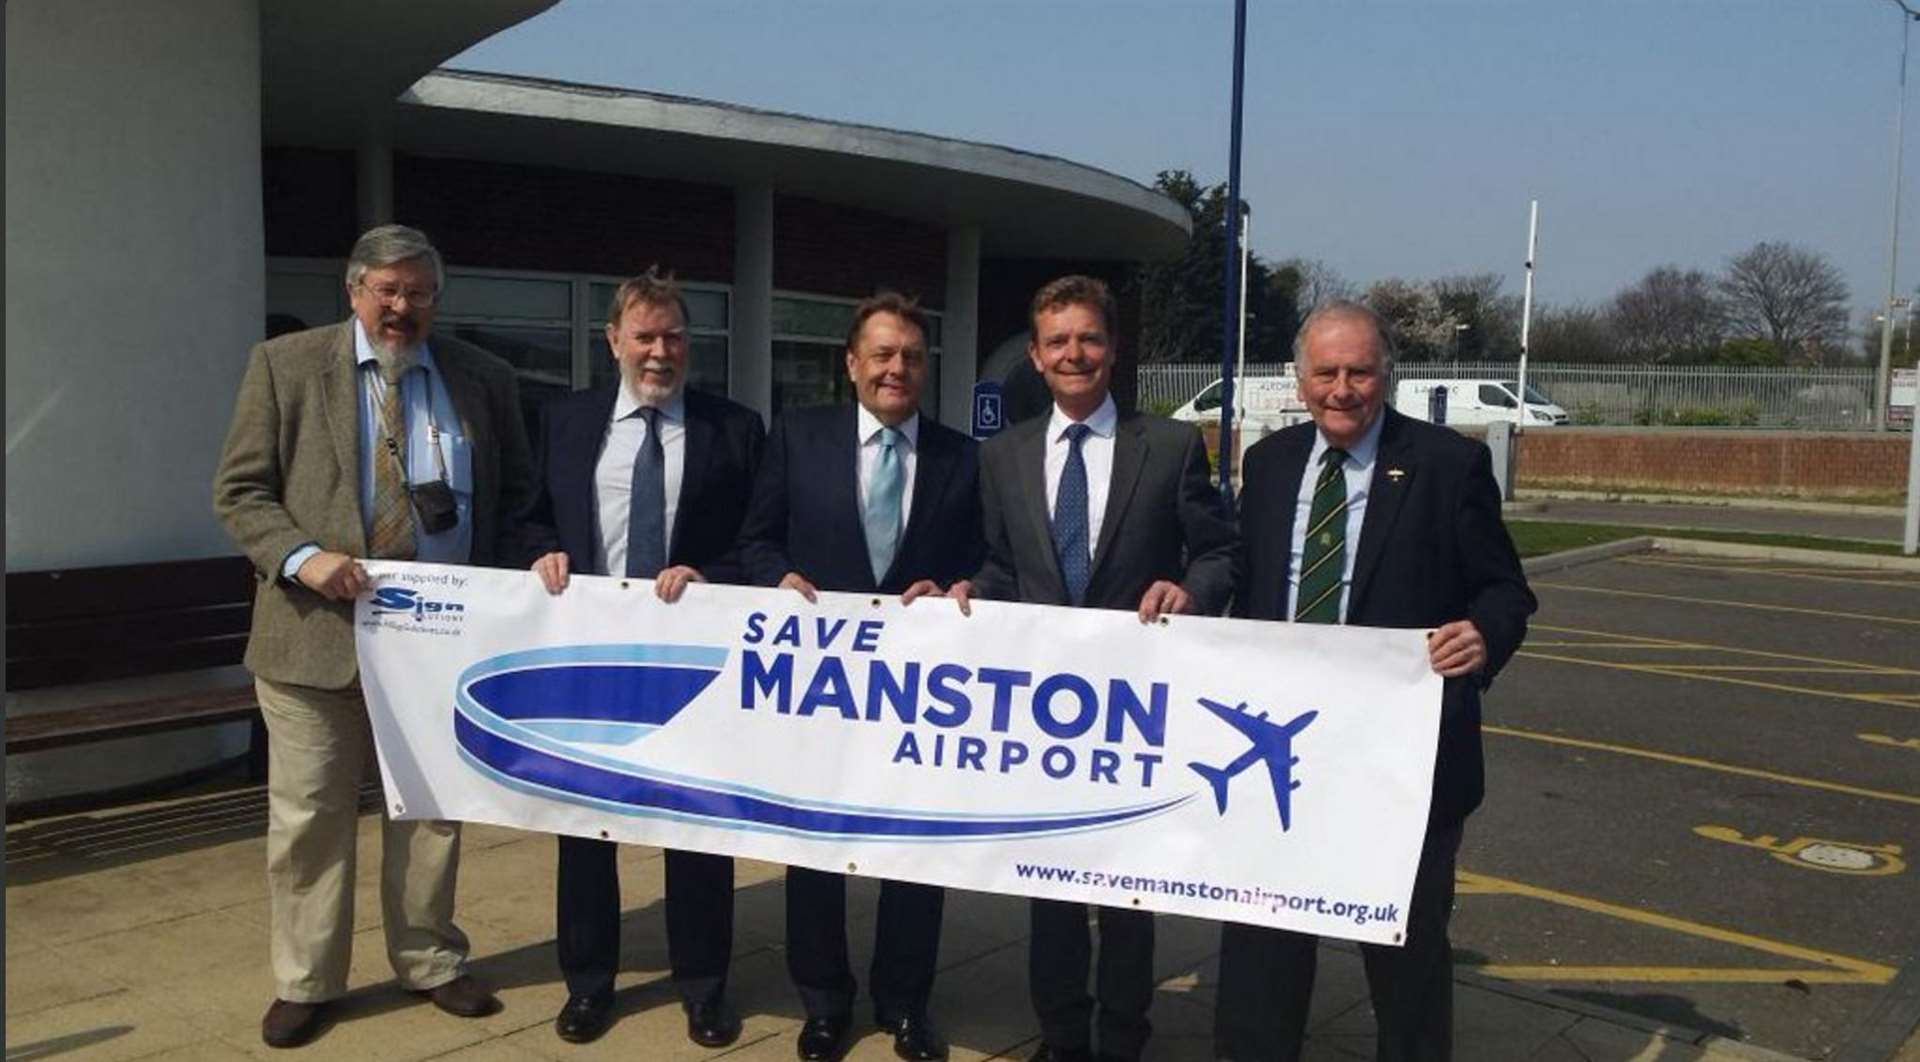 MPs Craig Mackinlay and Sir Roger Gale and the Save Manston campaigners